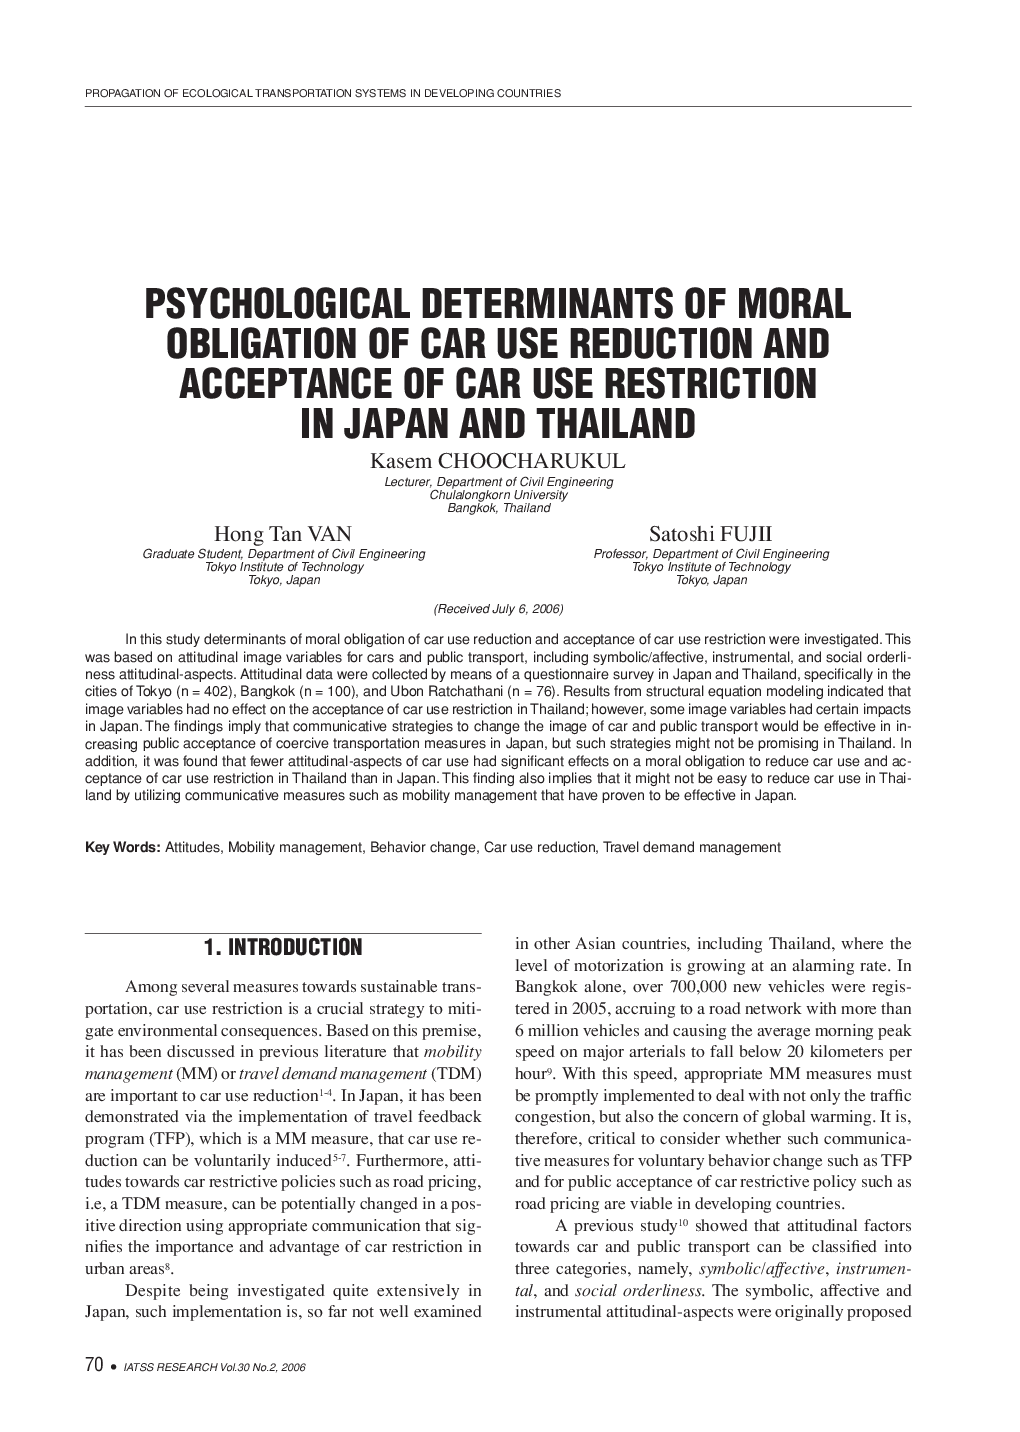 PSYCHOLOGICAL DETERMINANTS OF MORAL OBLIGATION OF CAR USE REDUCTION AND ACCEPTANCE OF CAR USE RESTRICTION IN JAPAN AND THAILAND